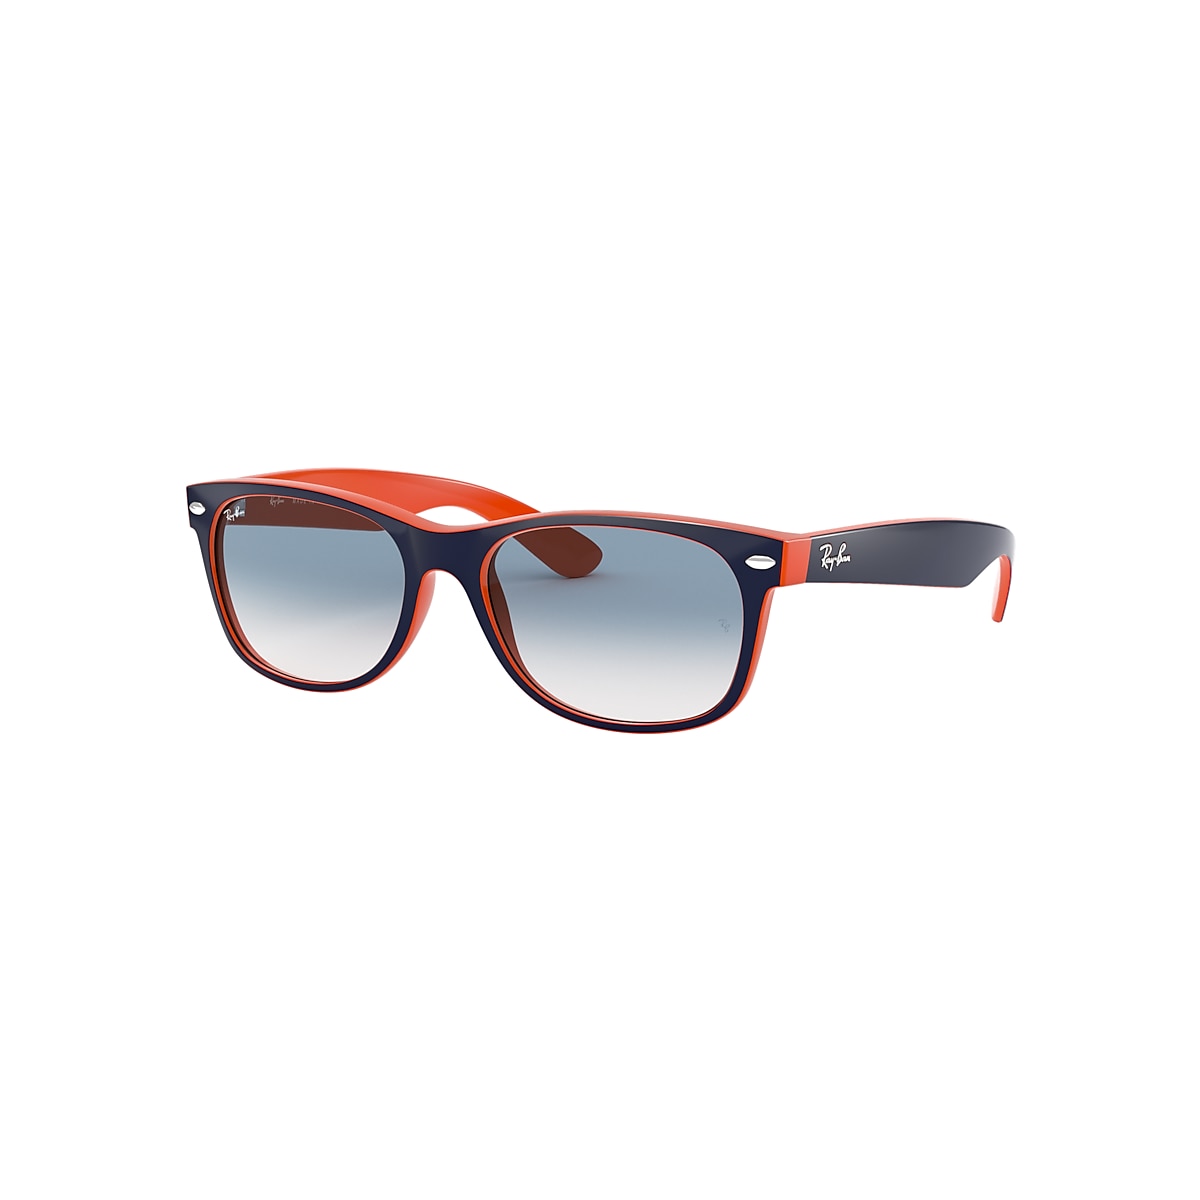 New Wayfarer Color Mix Sunglasses In Blue On Orange And Light Blue Ray Ban